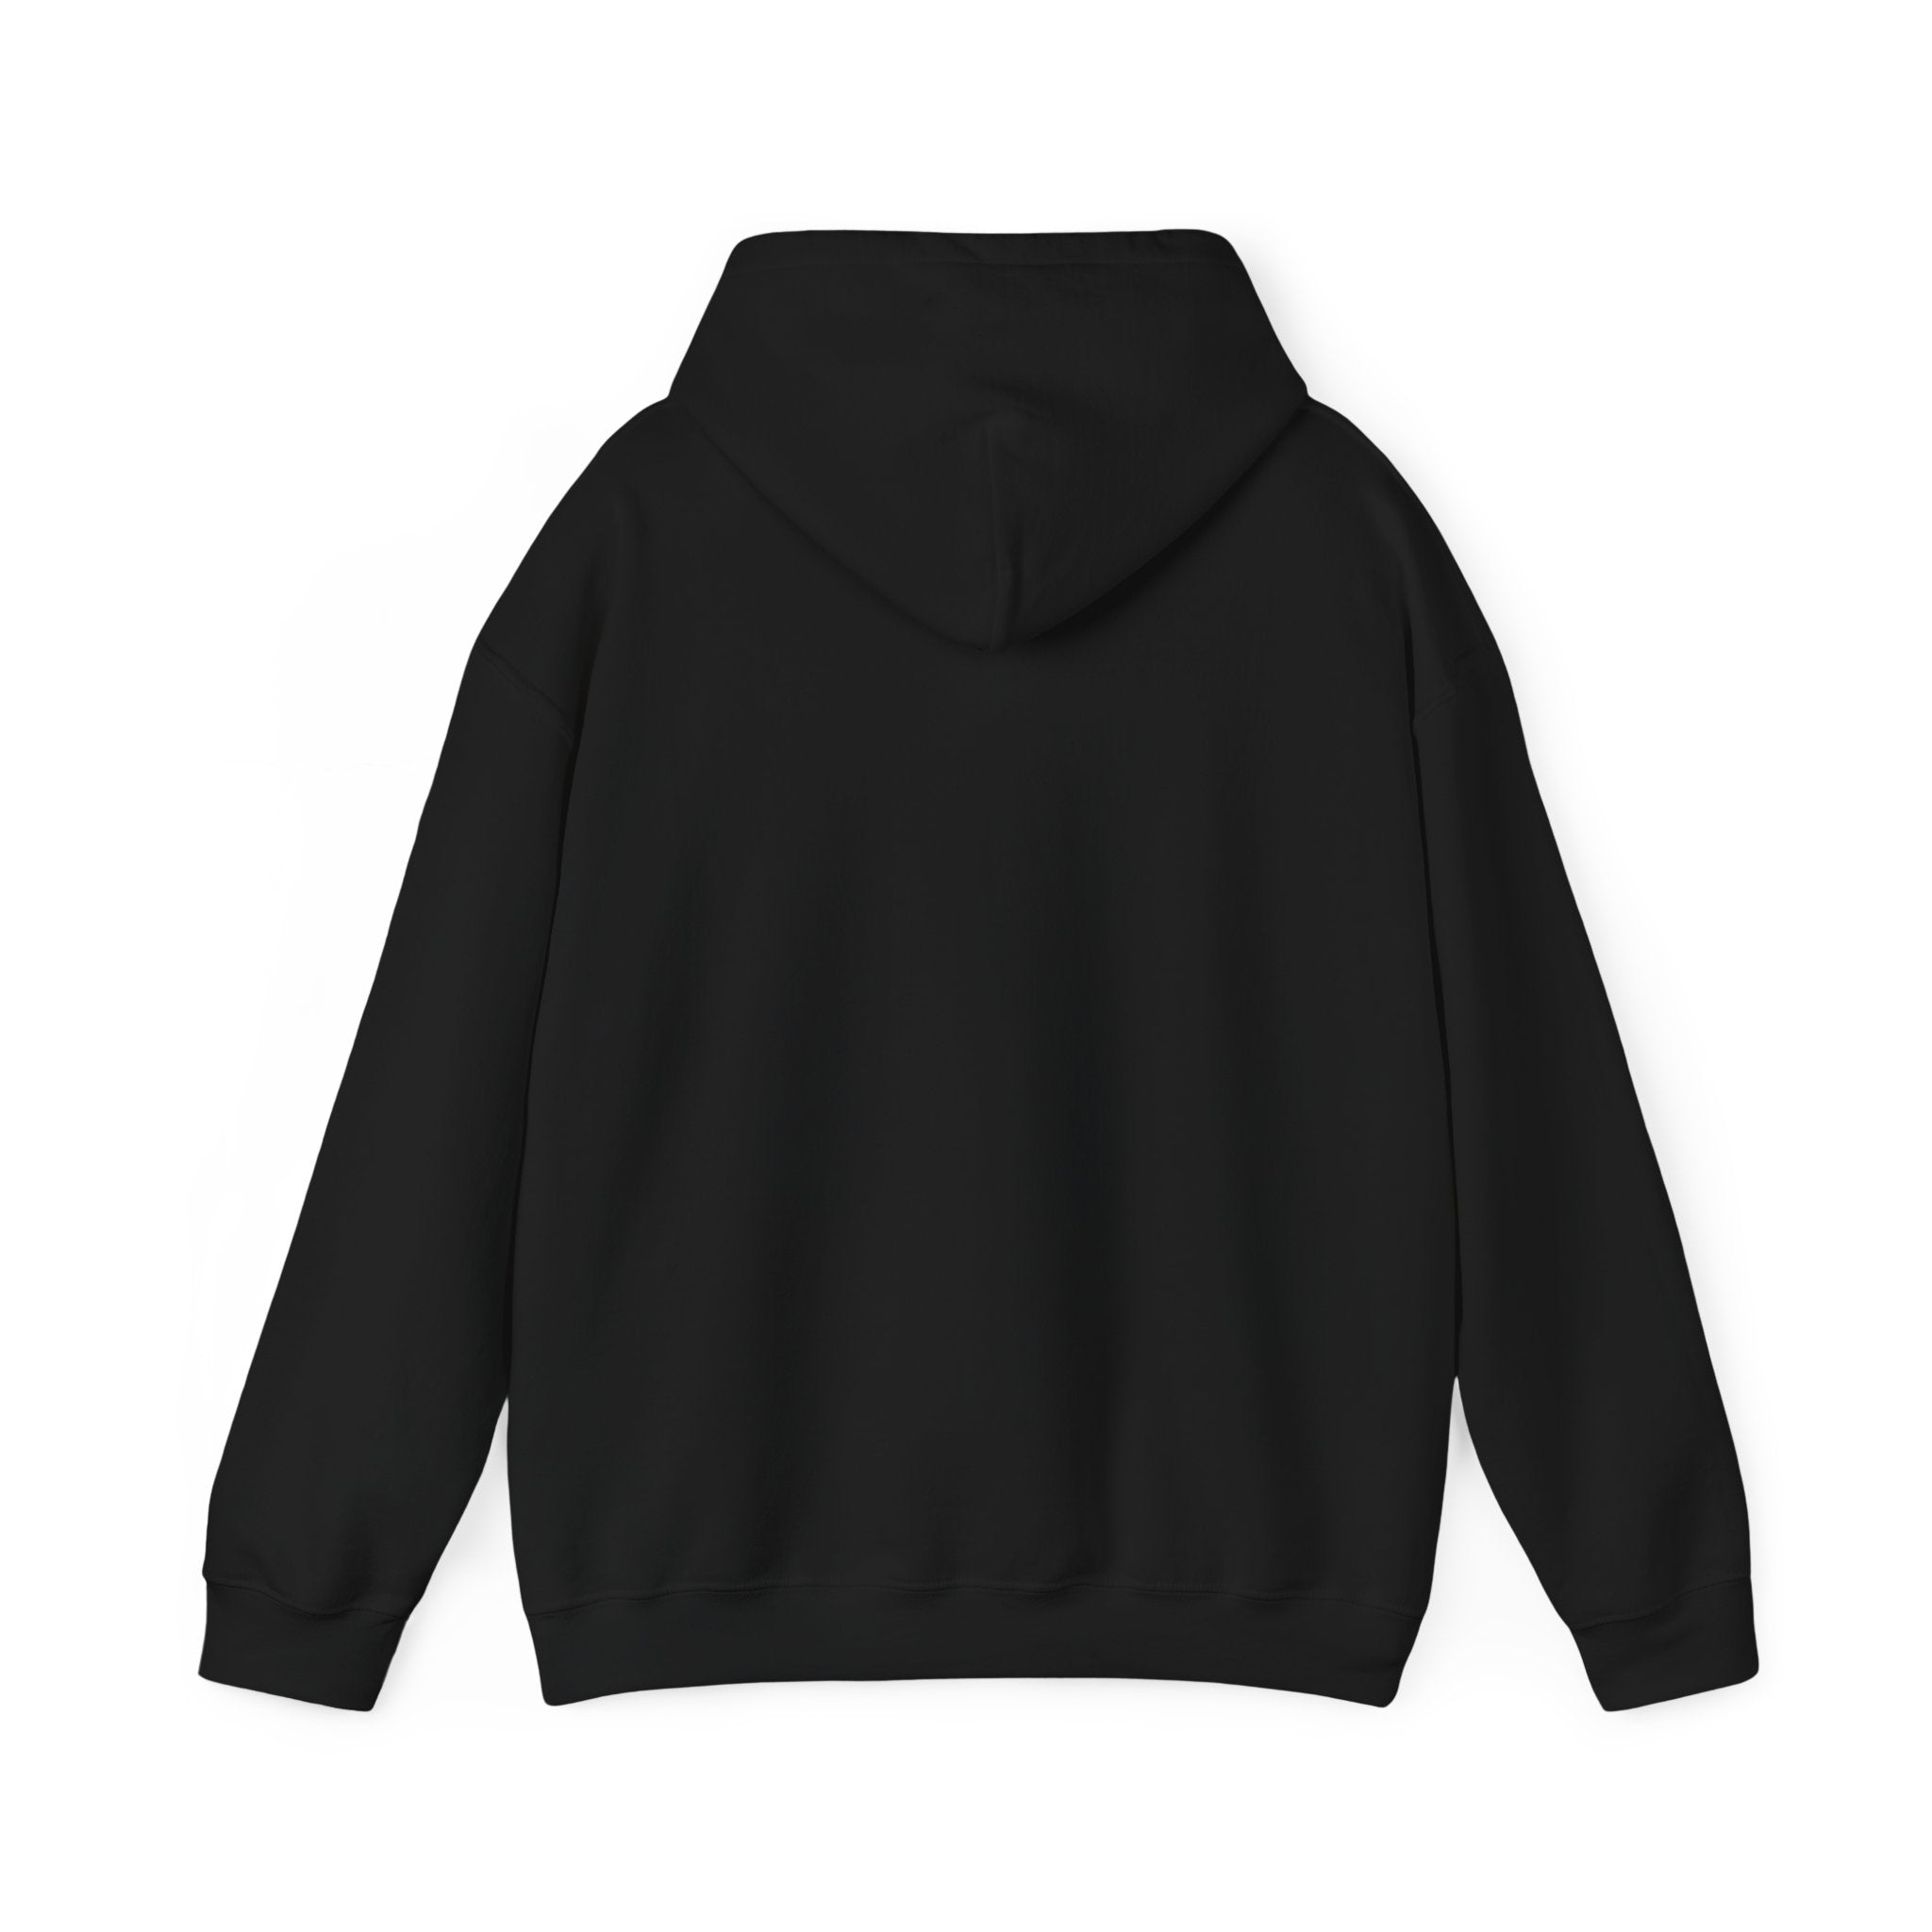 Back view of a plain black hooded sweatshirt with long sleeves, featuring a subtle C-Ho-Co-La-Te - Hooded Sweatshirt design for a fashion-forward touch.